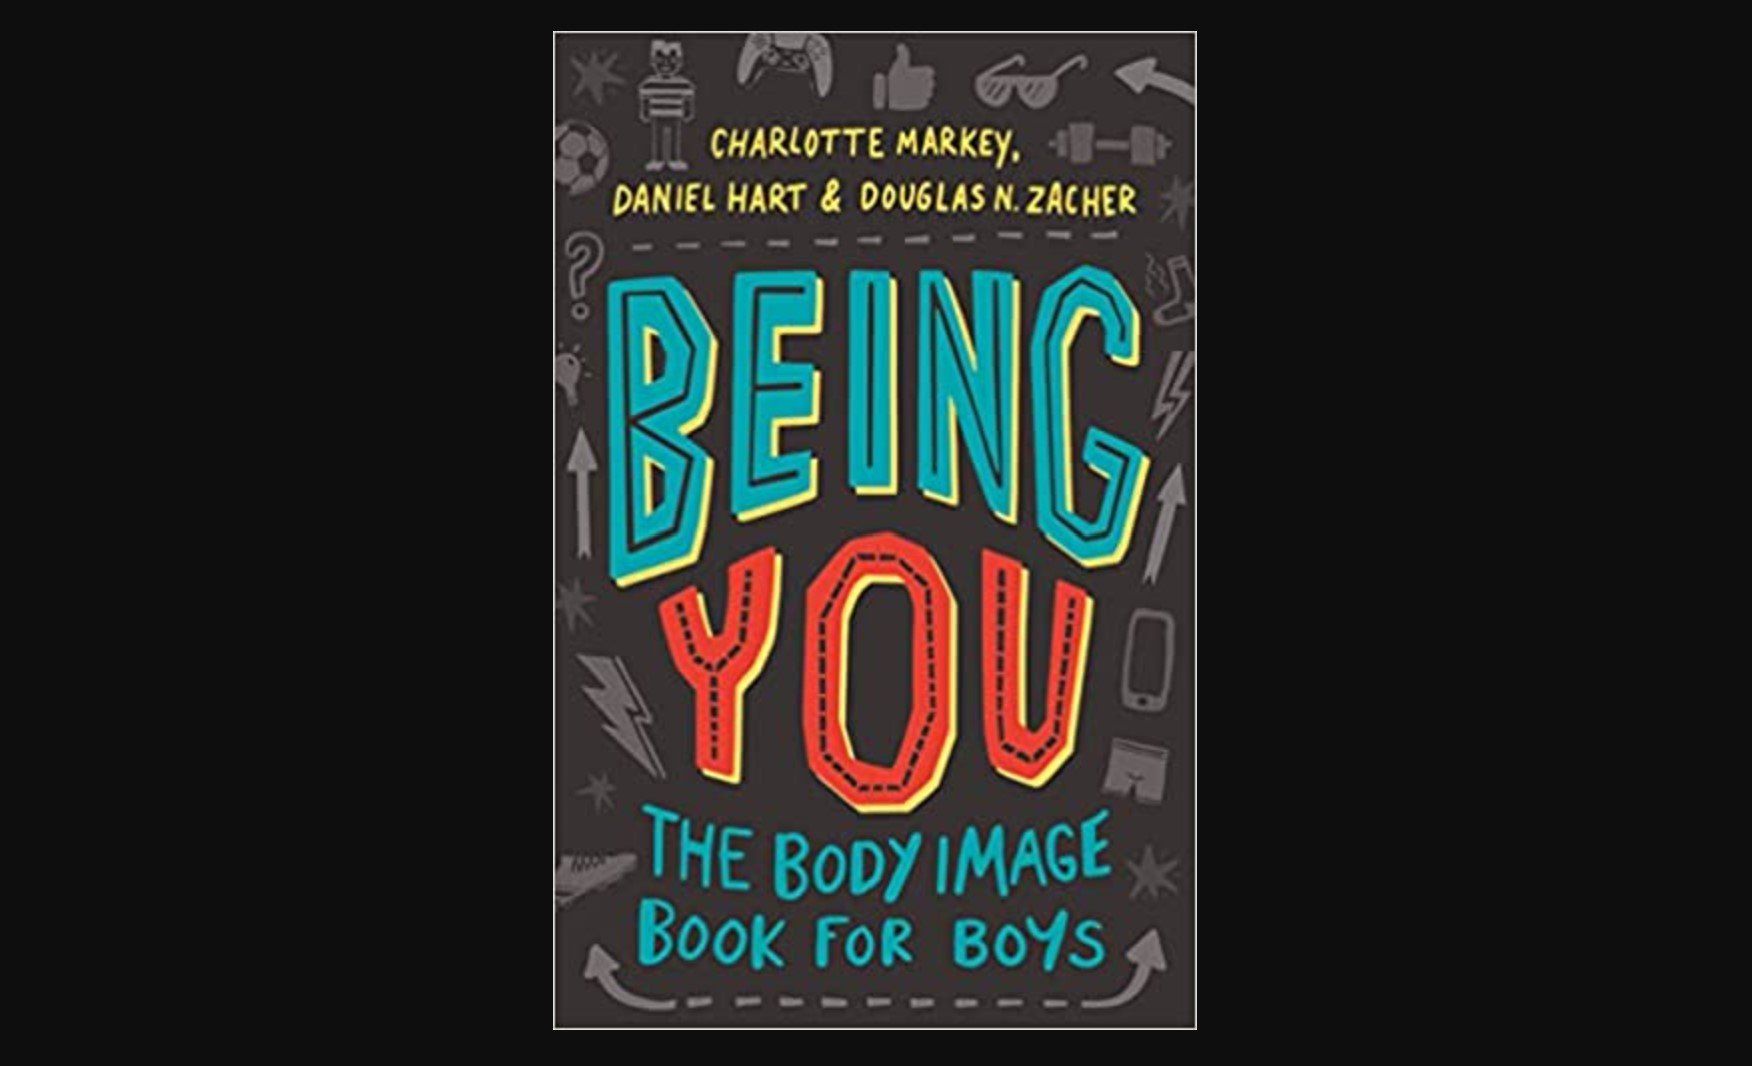 Being You: The Body Image Book for Boys 1st Edition by Charlotte Markey